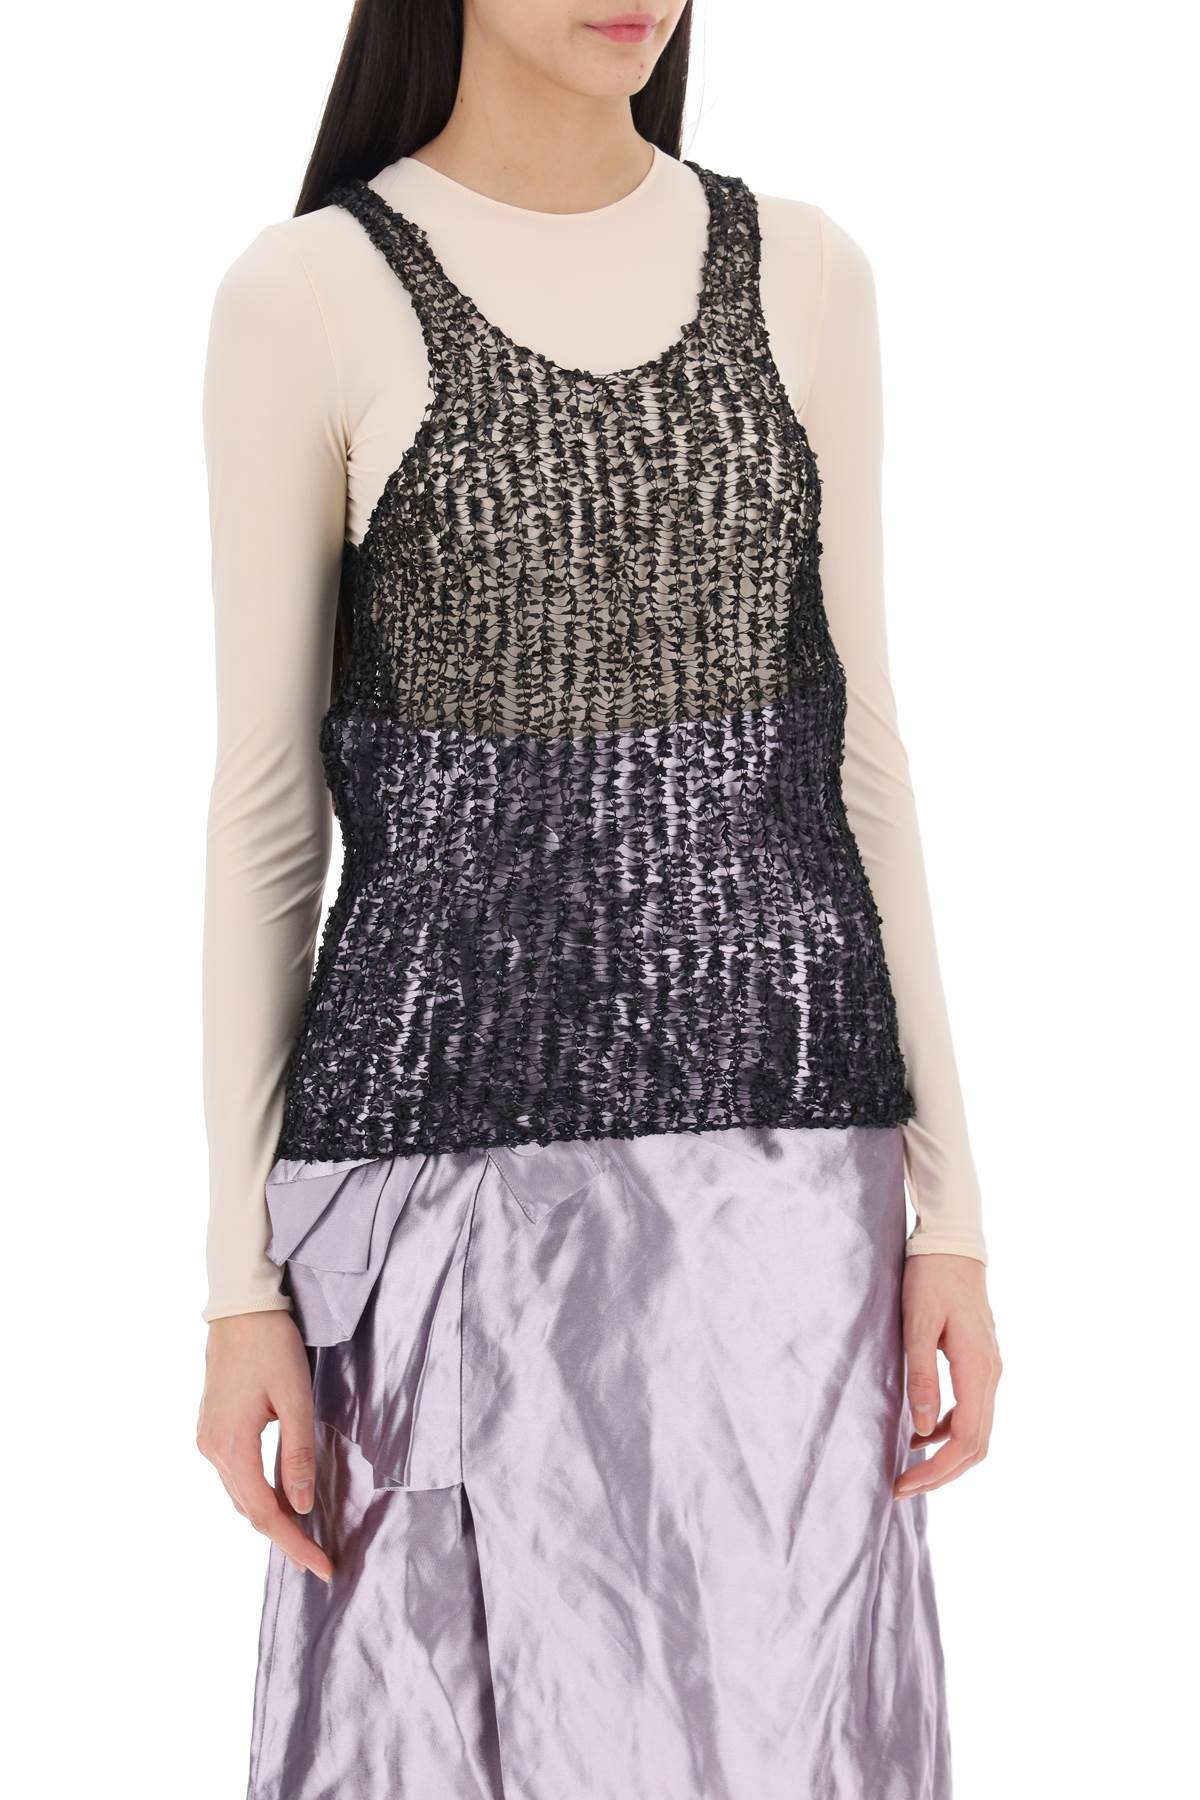 Shop Maison Margiela Textured Mesh Top For Testing In Black